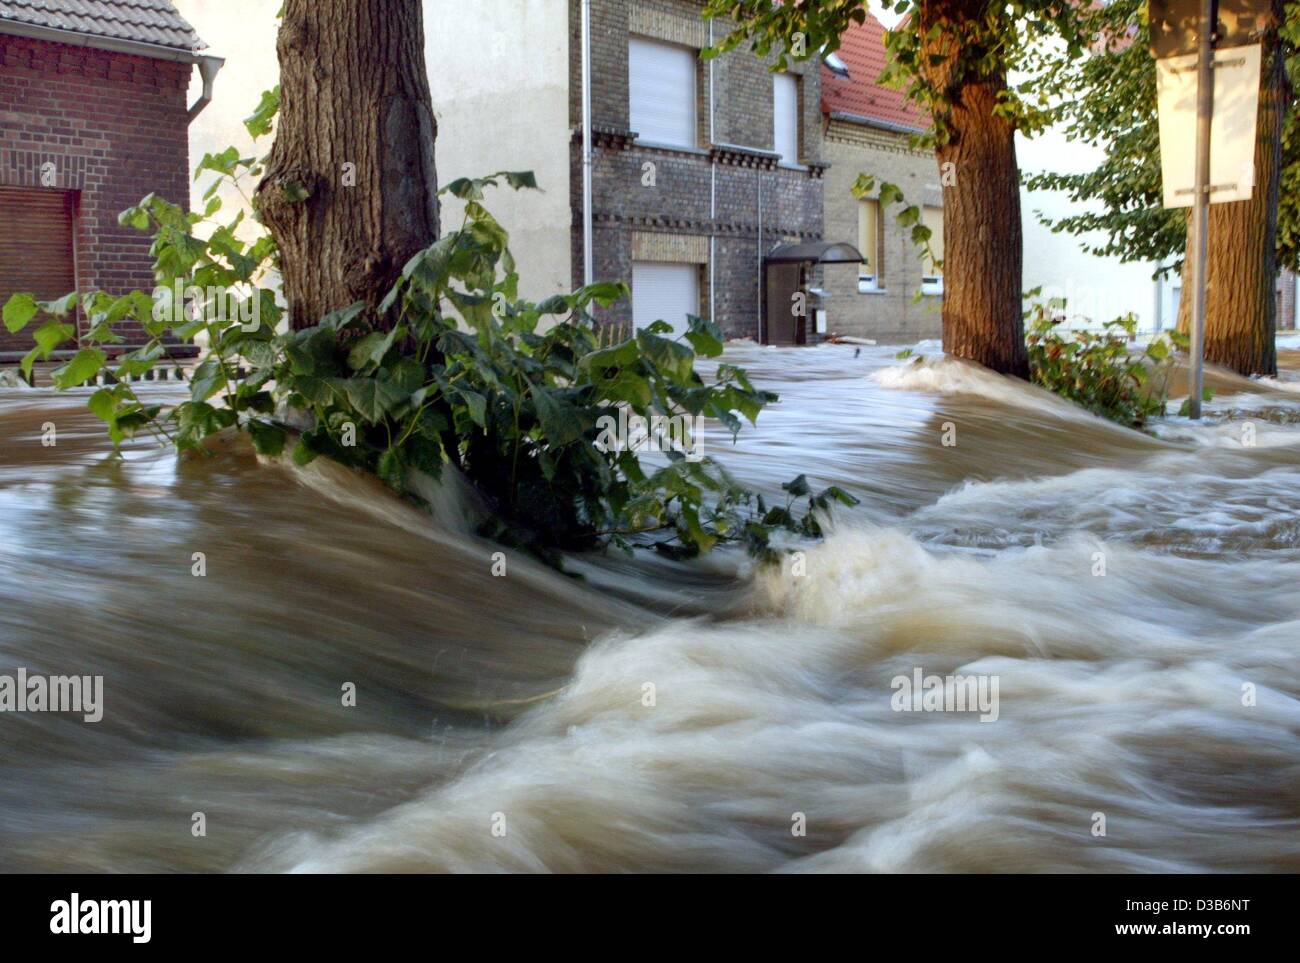 (dpa) - The waters of the river Elbe continue to flood a quarter in Wittenberg, east Germany, 18 August 2002. Some 2,000 residents had been evacuated before the river rose over the crest of the dyke and breached a dam made of sandbags. The river Elbe still continues to surge northward, leaving a tra Stock Photo